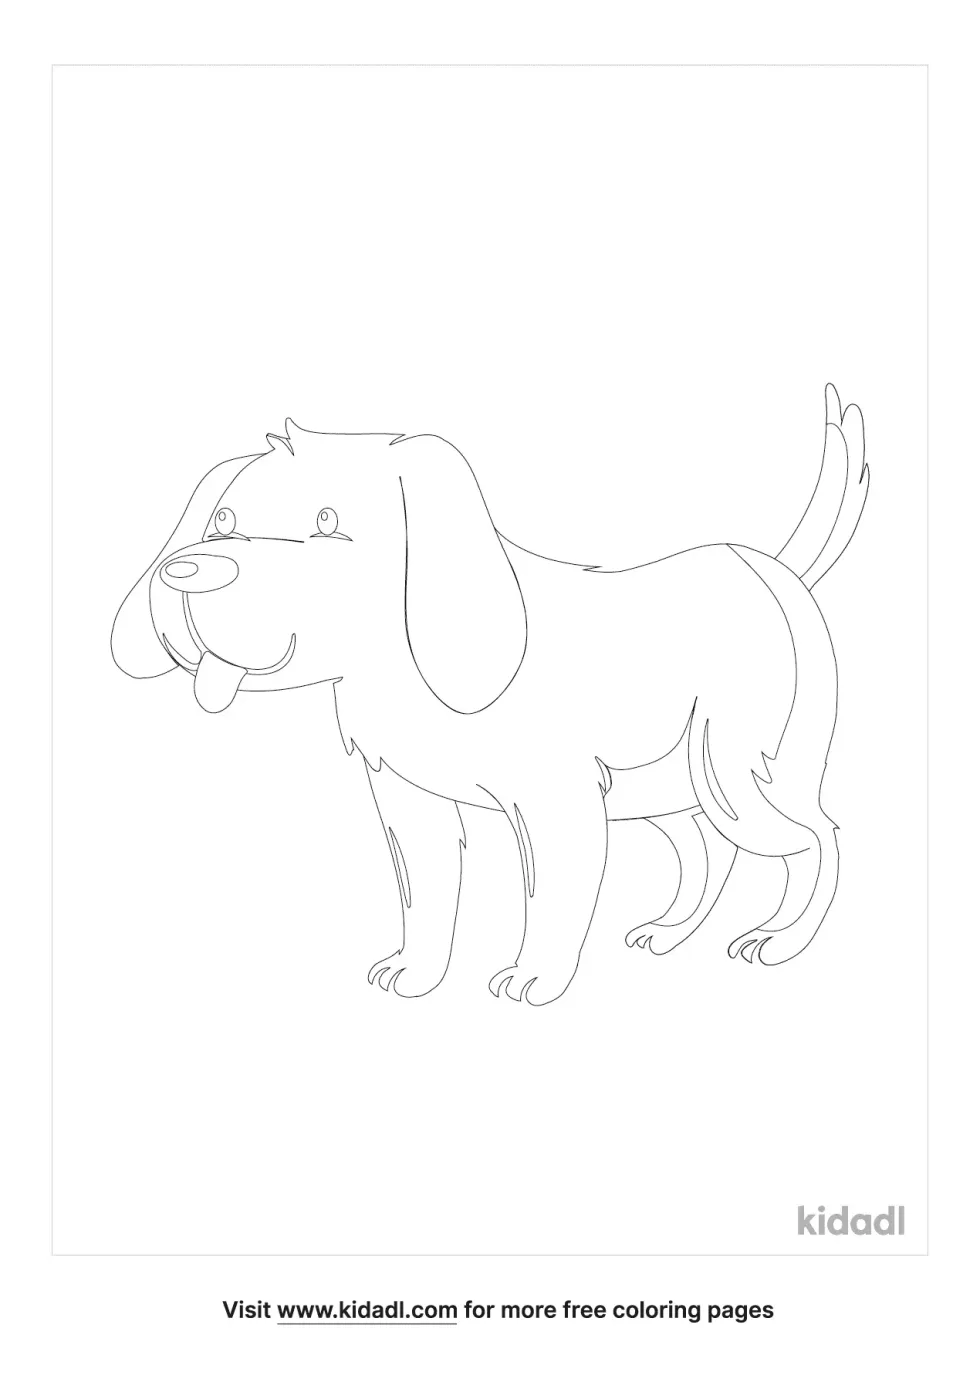 Floppy Ear Puppy Coloring Page